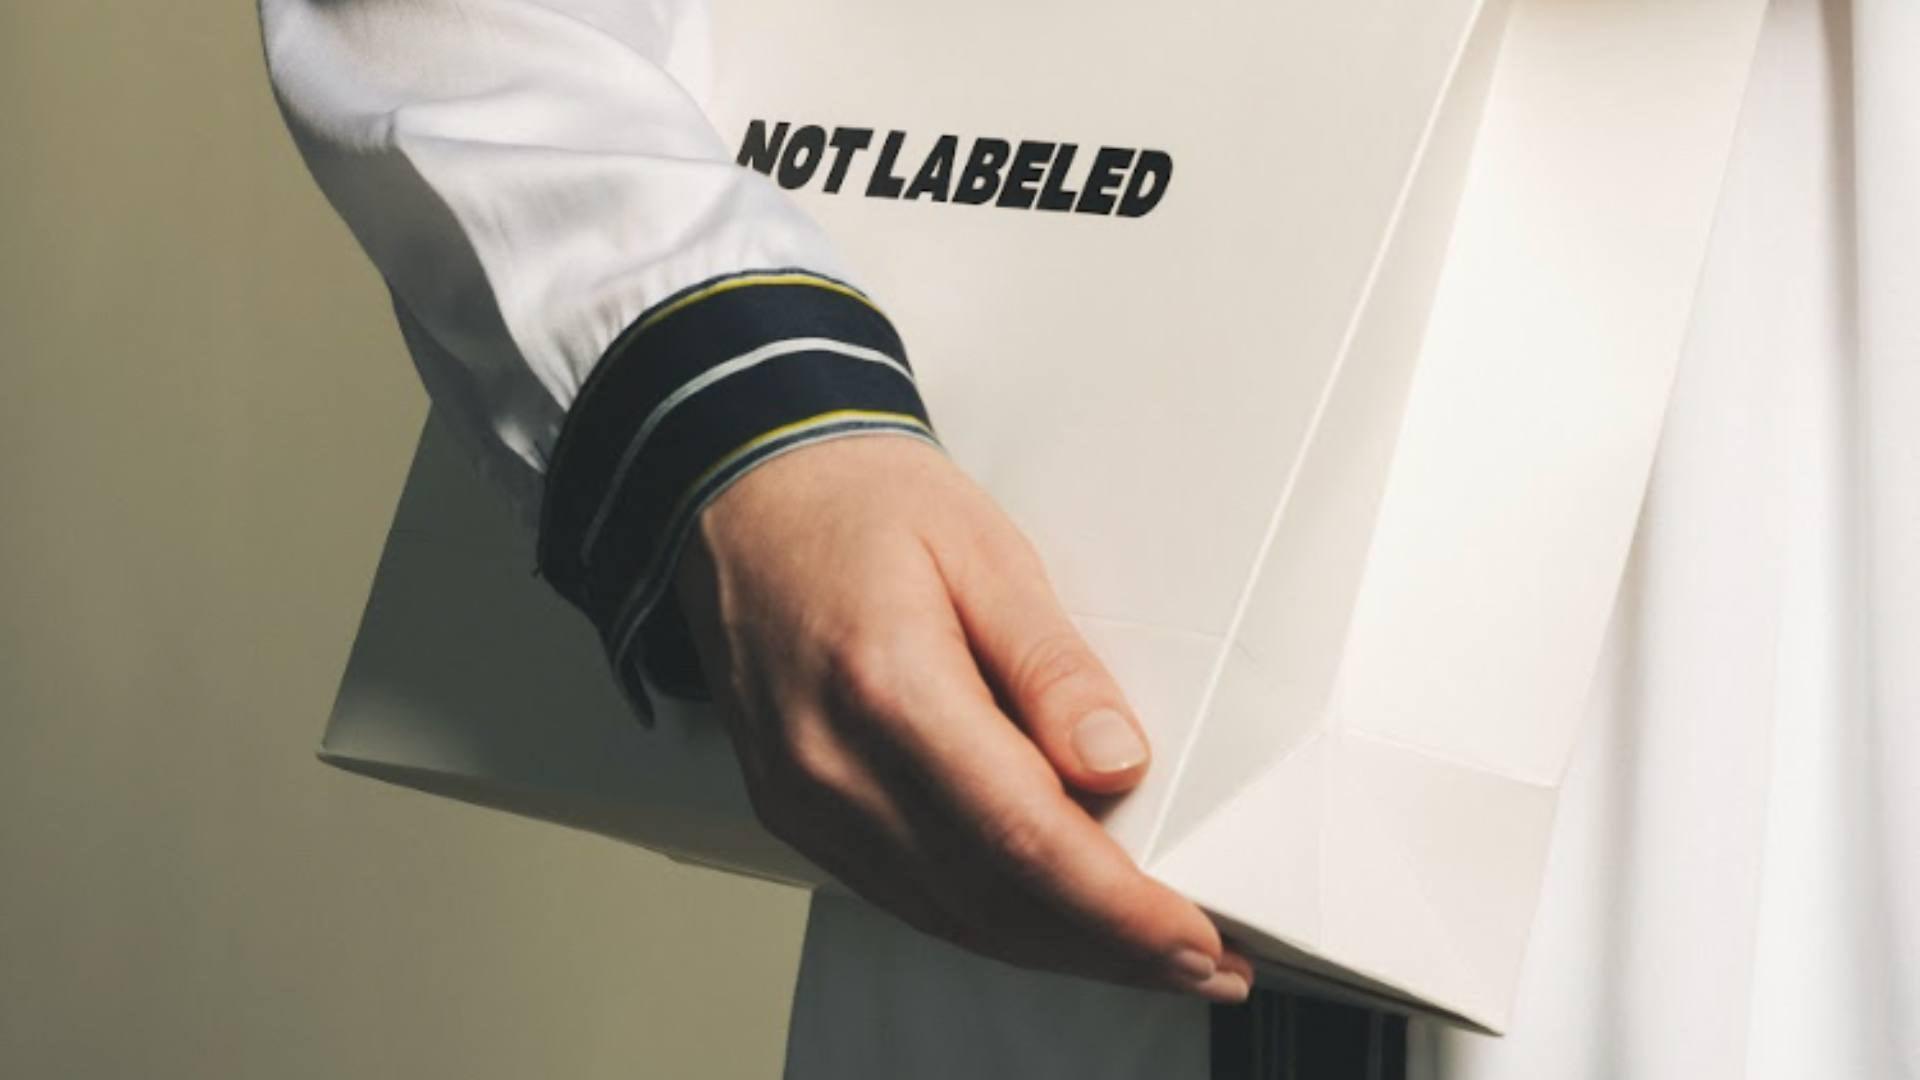 A person wears a white jacket with black and white striped cuffs while holding a Not Labeled gift bag.